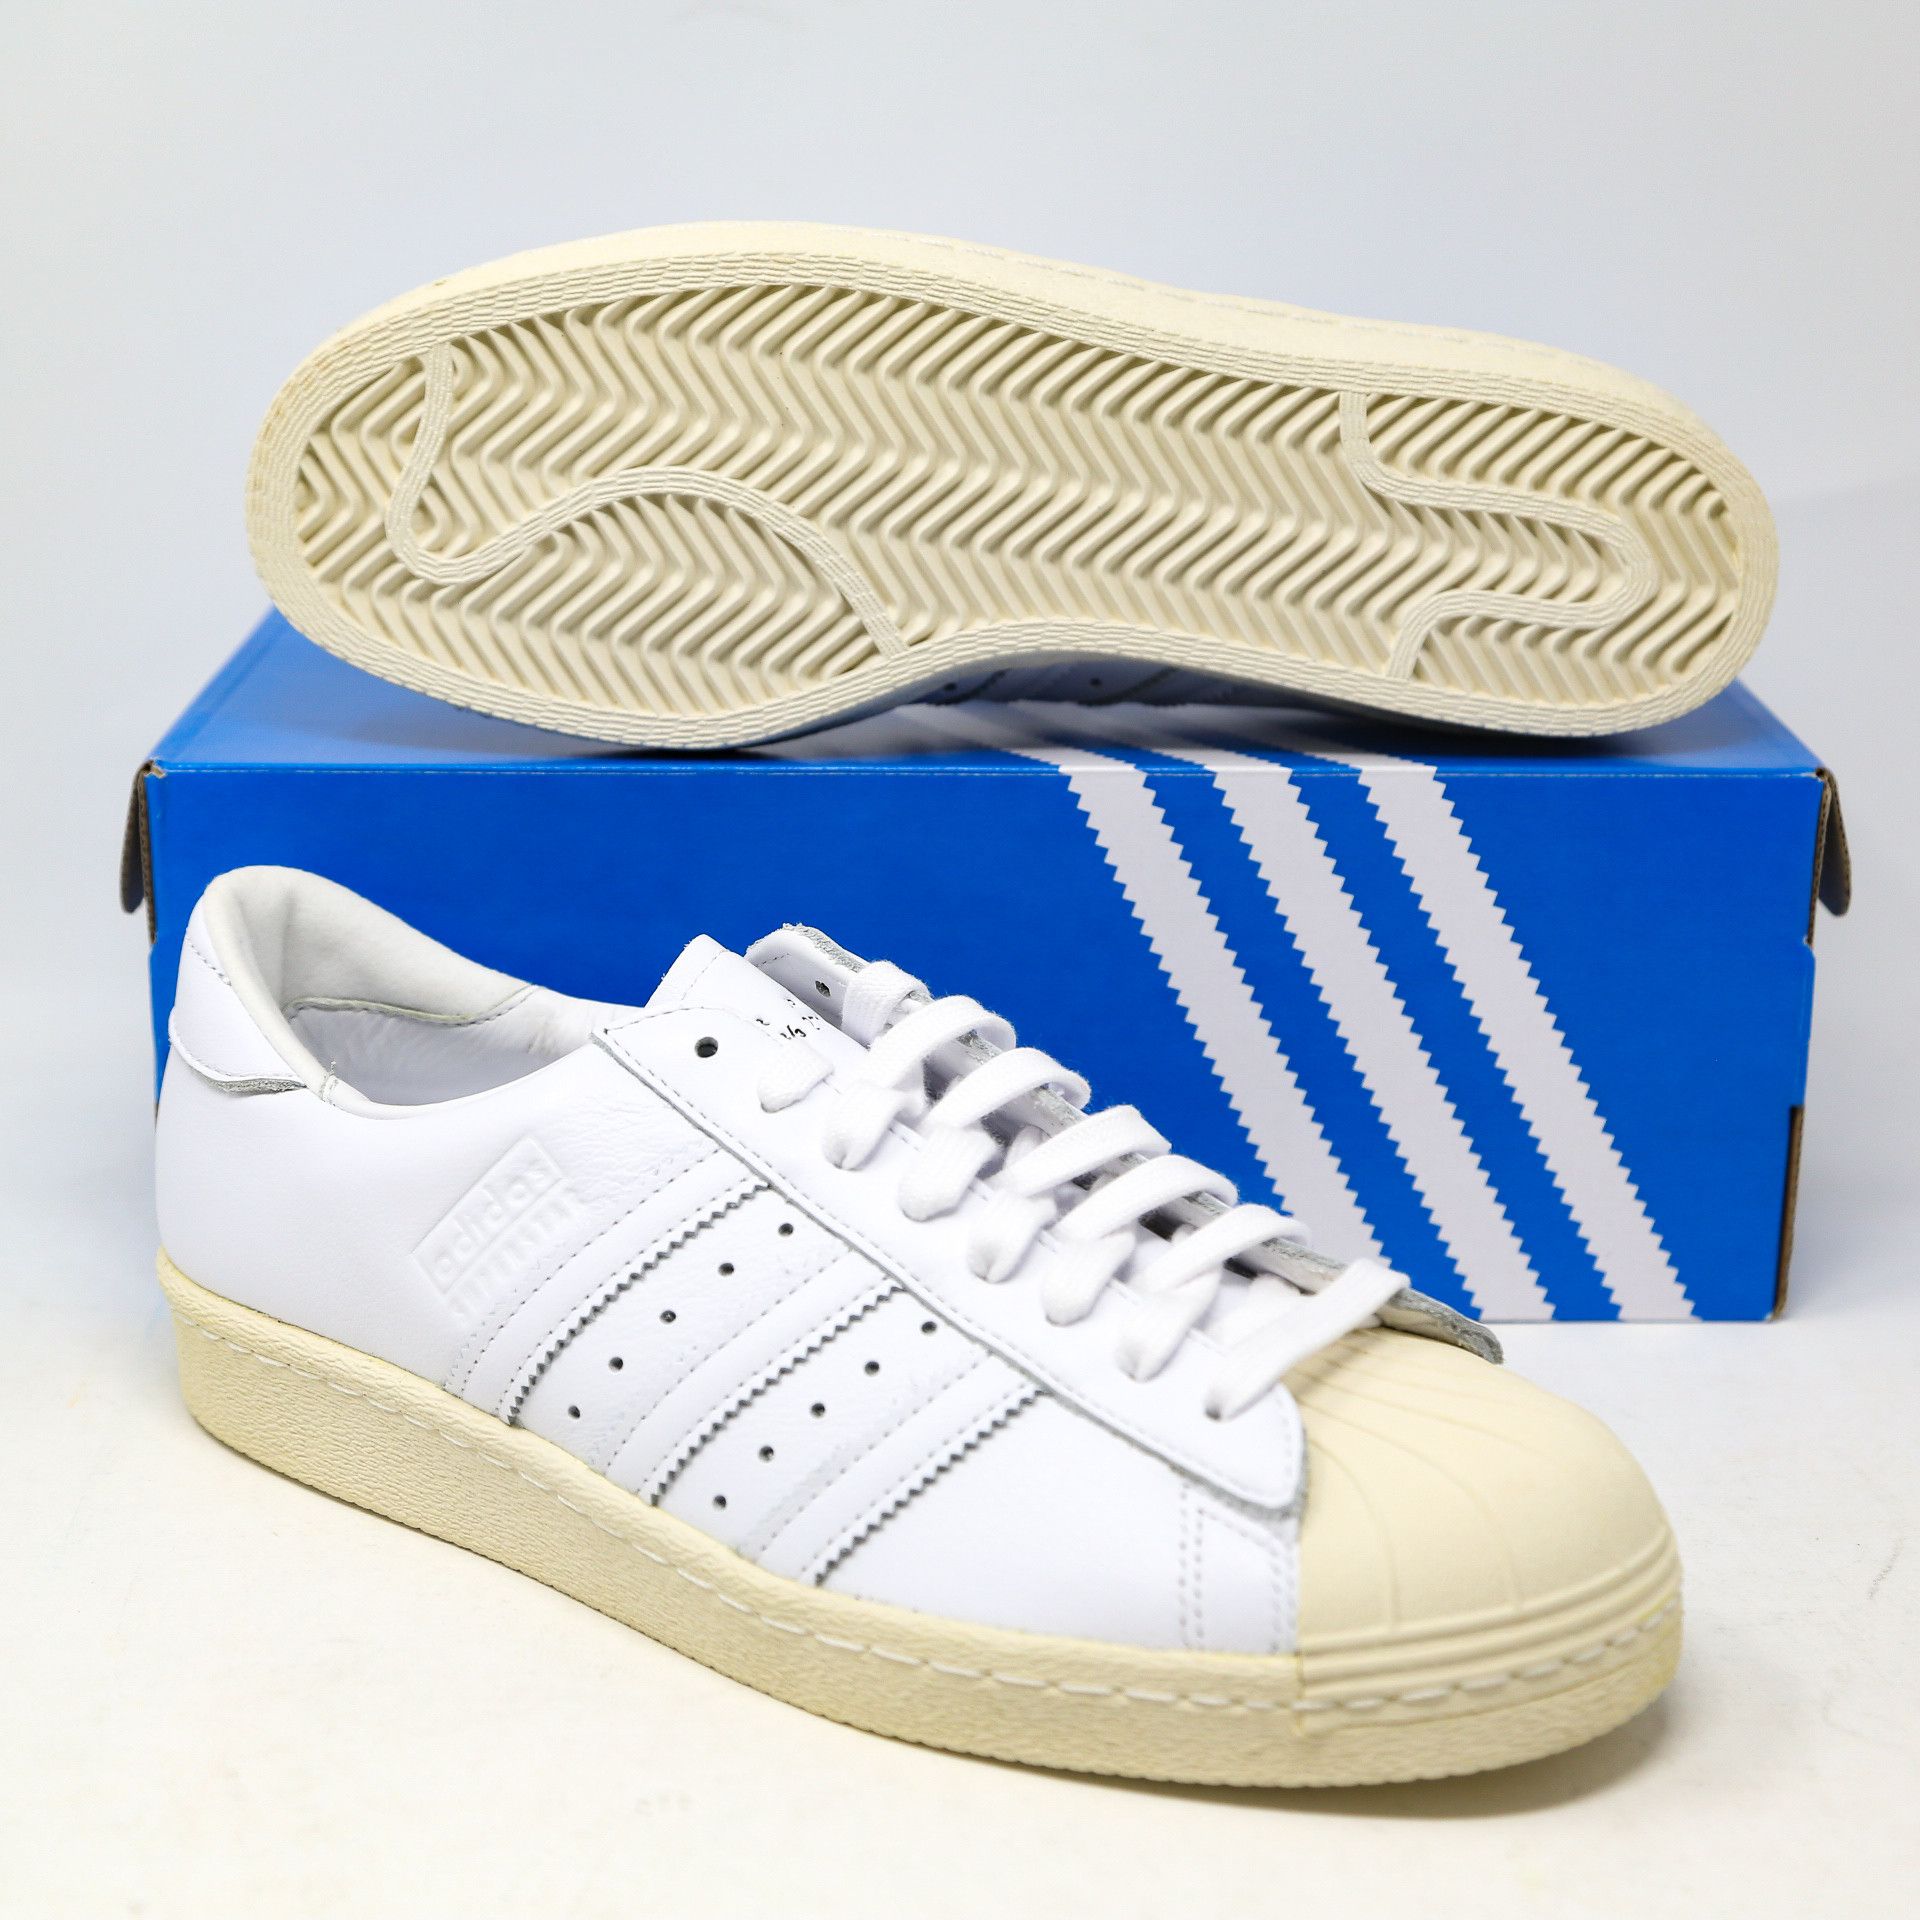 Adidas Superstar 80s Recon Off-White EE7392 Retro size 11 Size US 11 / EU 44 - 1 Preview